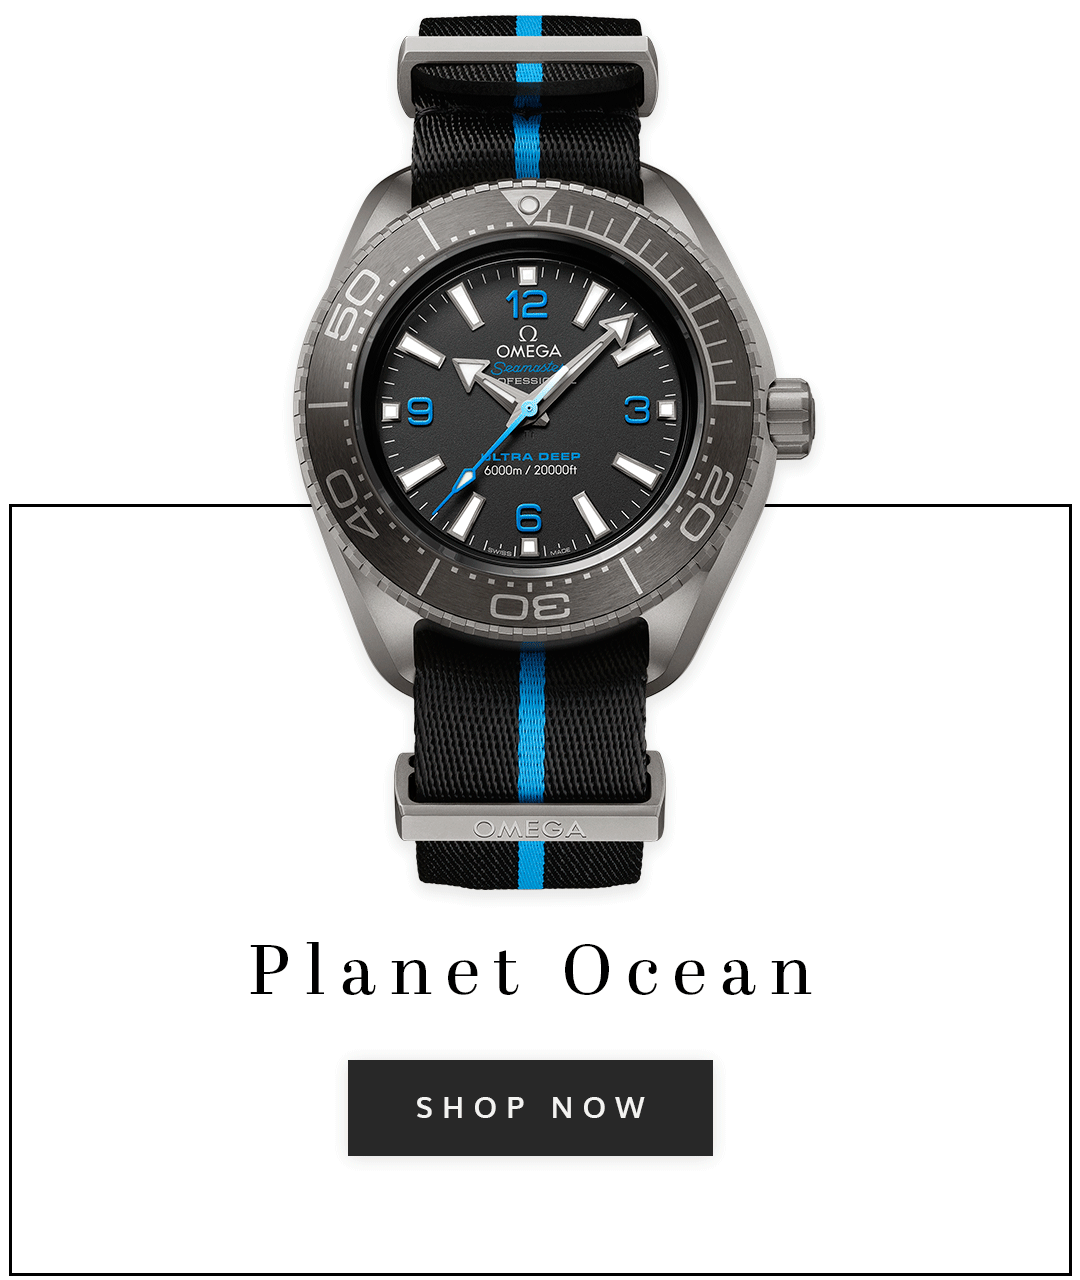 An OMEGA seamaster planet ocean watch with text shop now